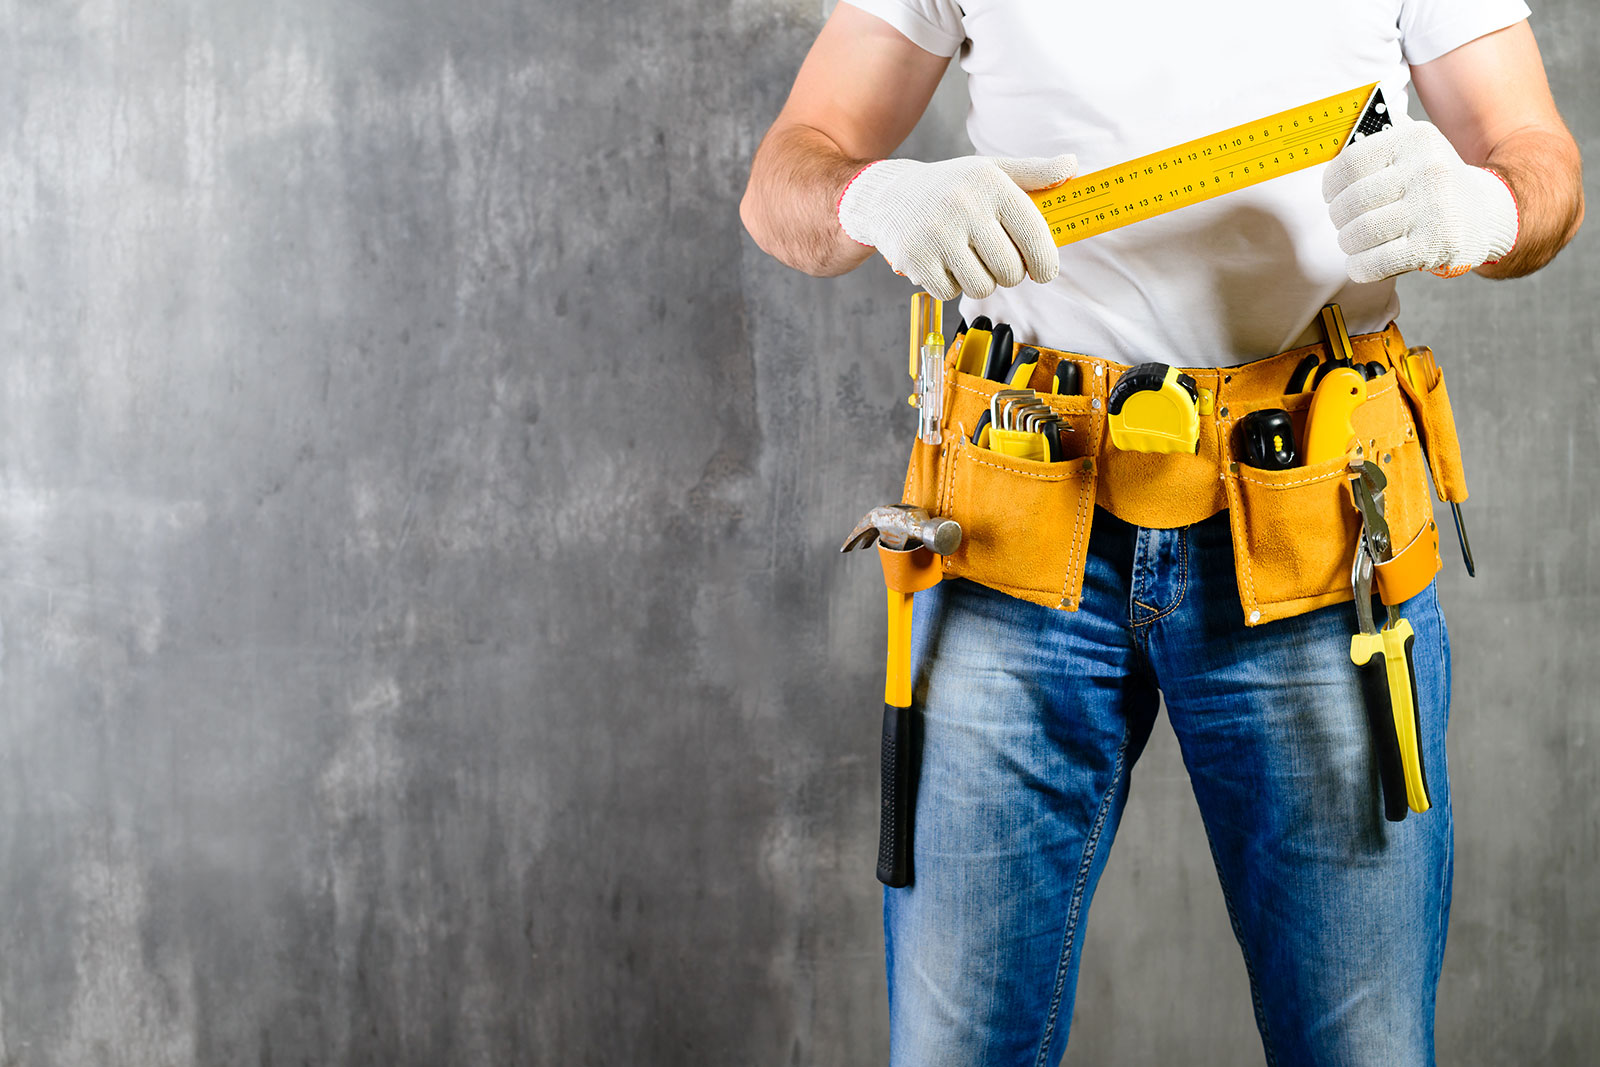 What Should A General Home Repair Person Charge Hourly